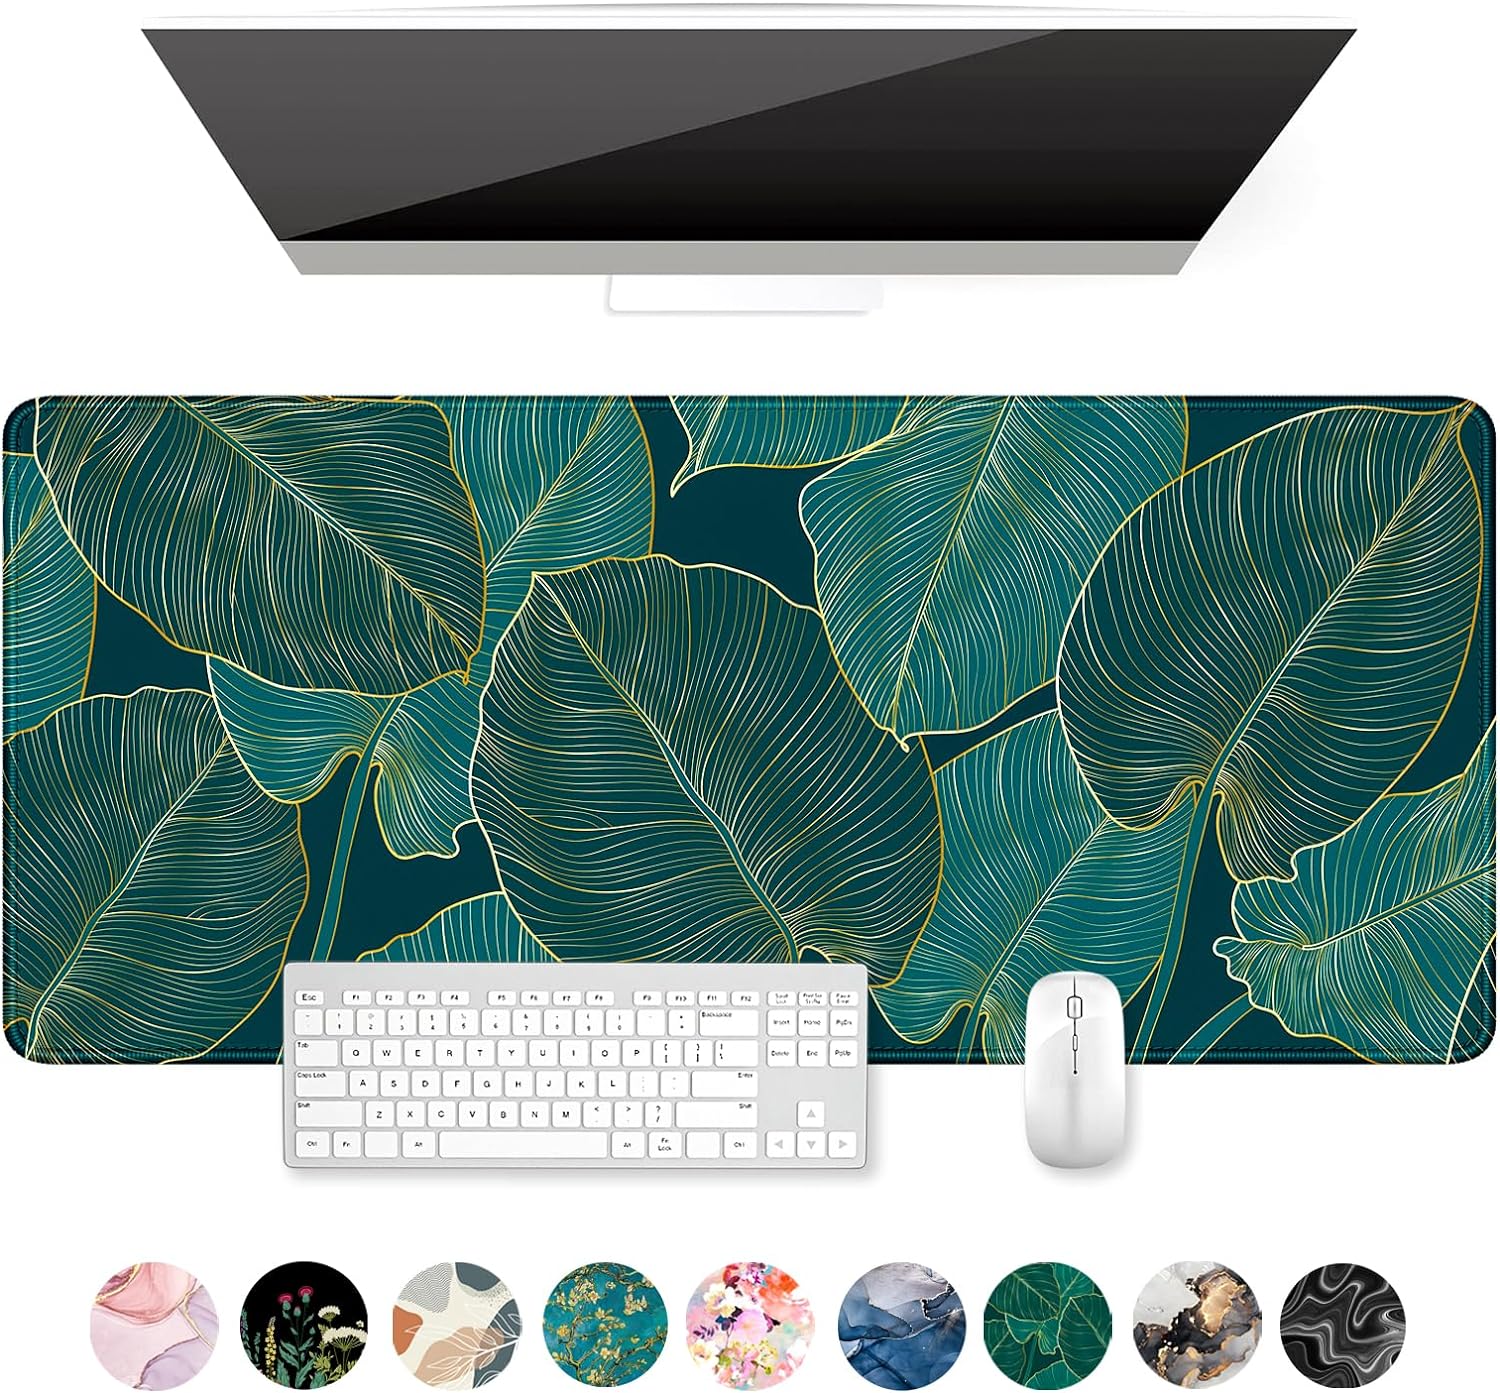 Auhoahsil Extended Mouse Pad, XXL Gaming Mouse Pads, Large Big Mousepad Laptop Computer Keyboard Mat Desk Pad with Non-Slip Base Stitched Edge for Gaming Office, 35.5 x 15.7 inch, Tropical Leaves